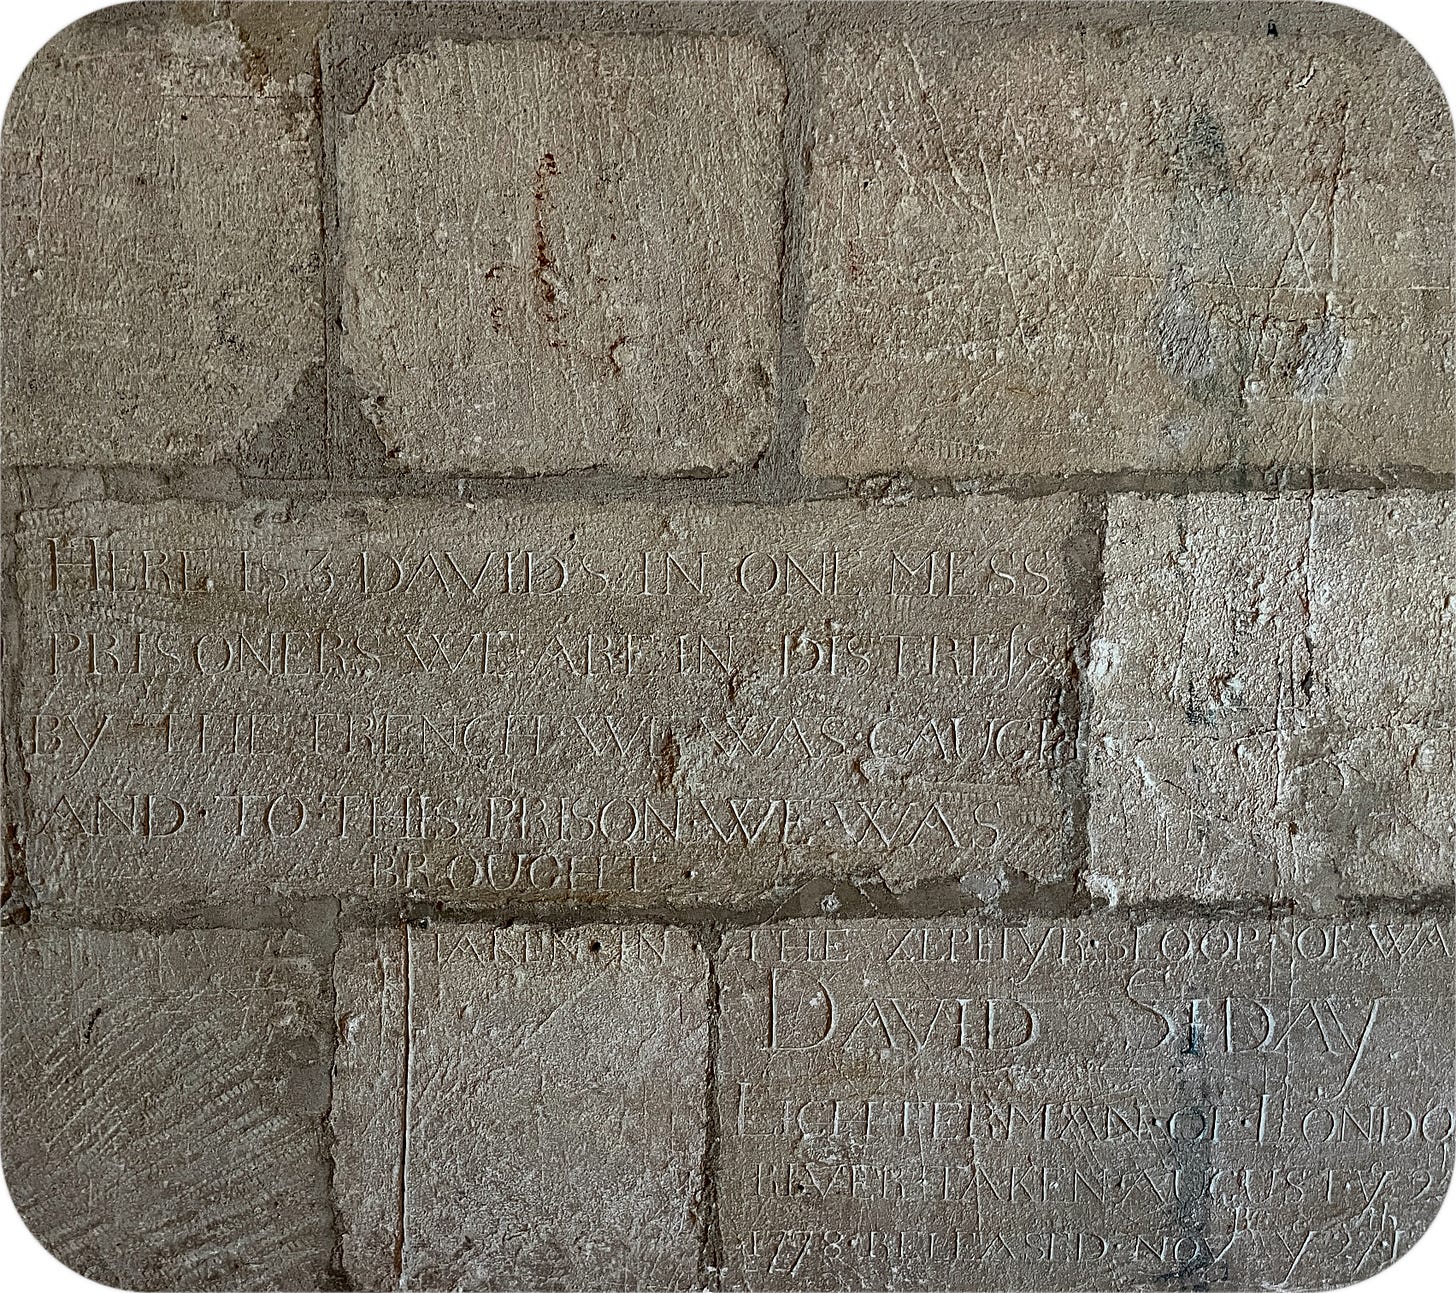 Prisoners names etched on the wall of Chateau de Tarascon, France